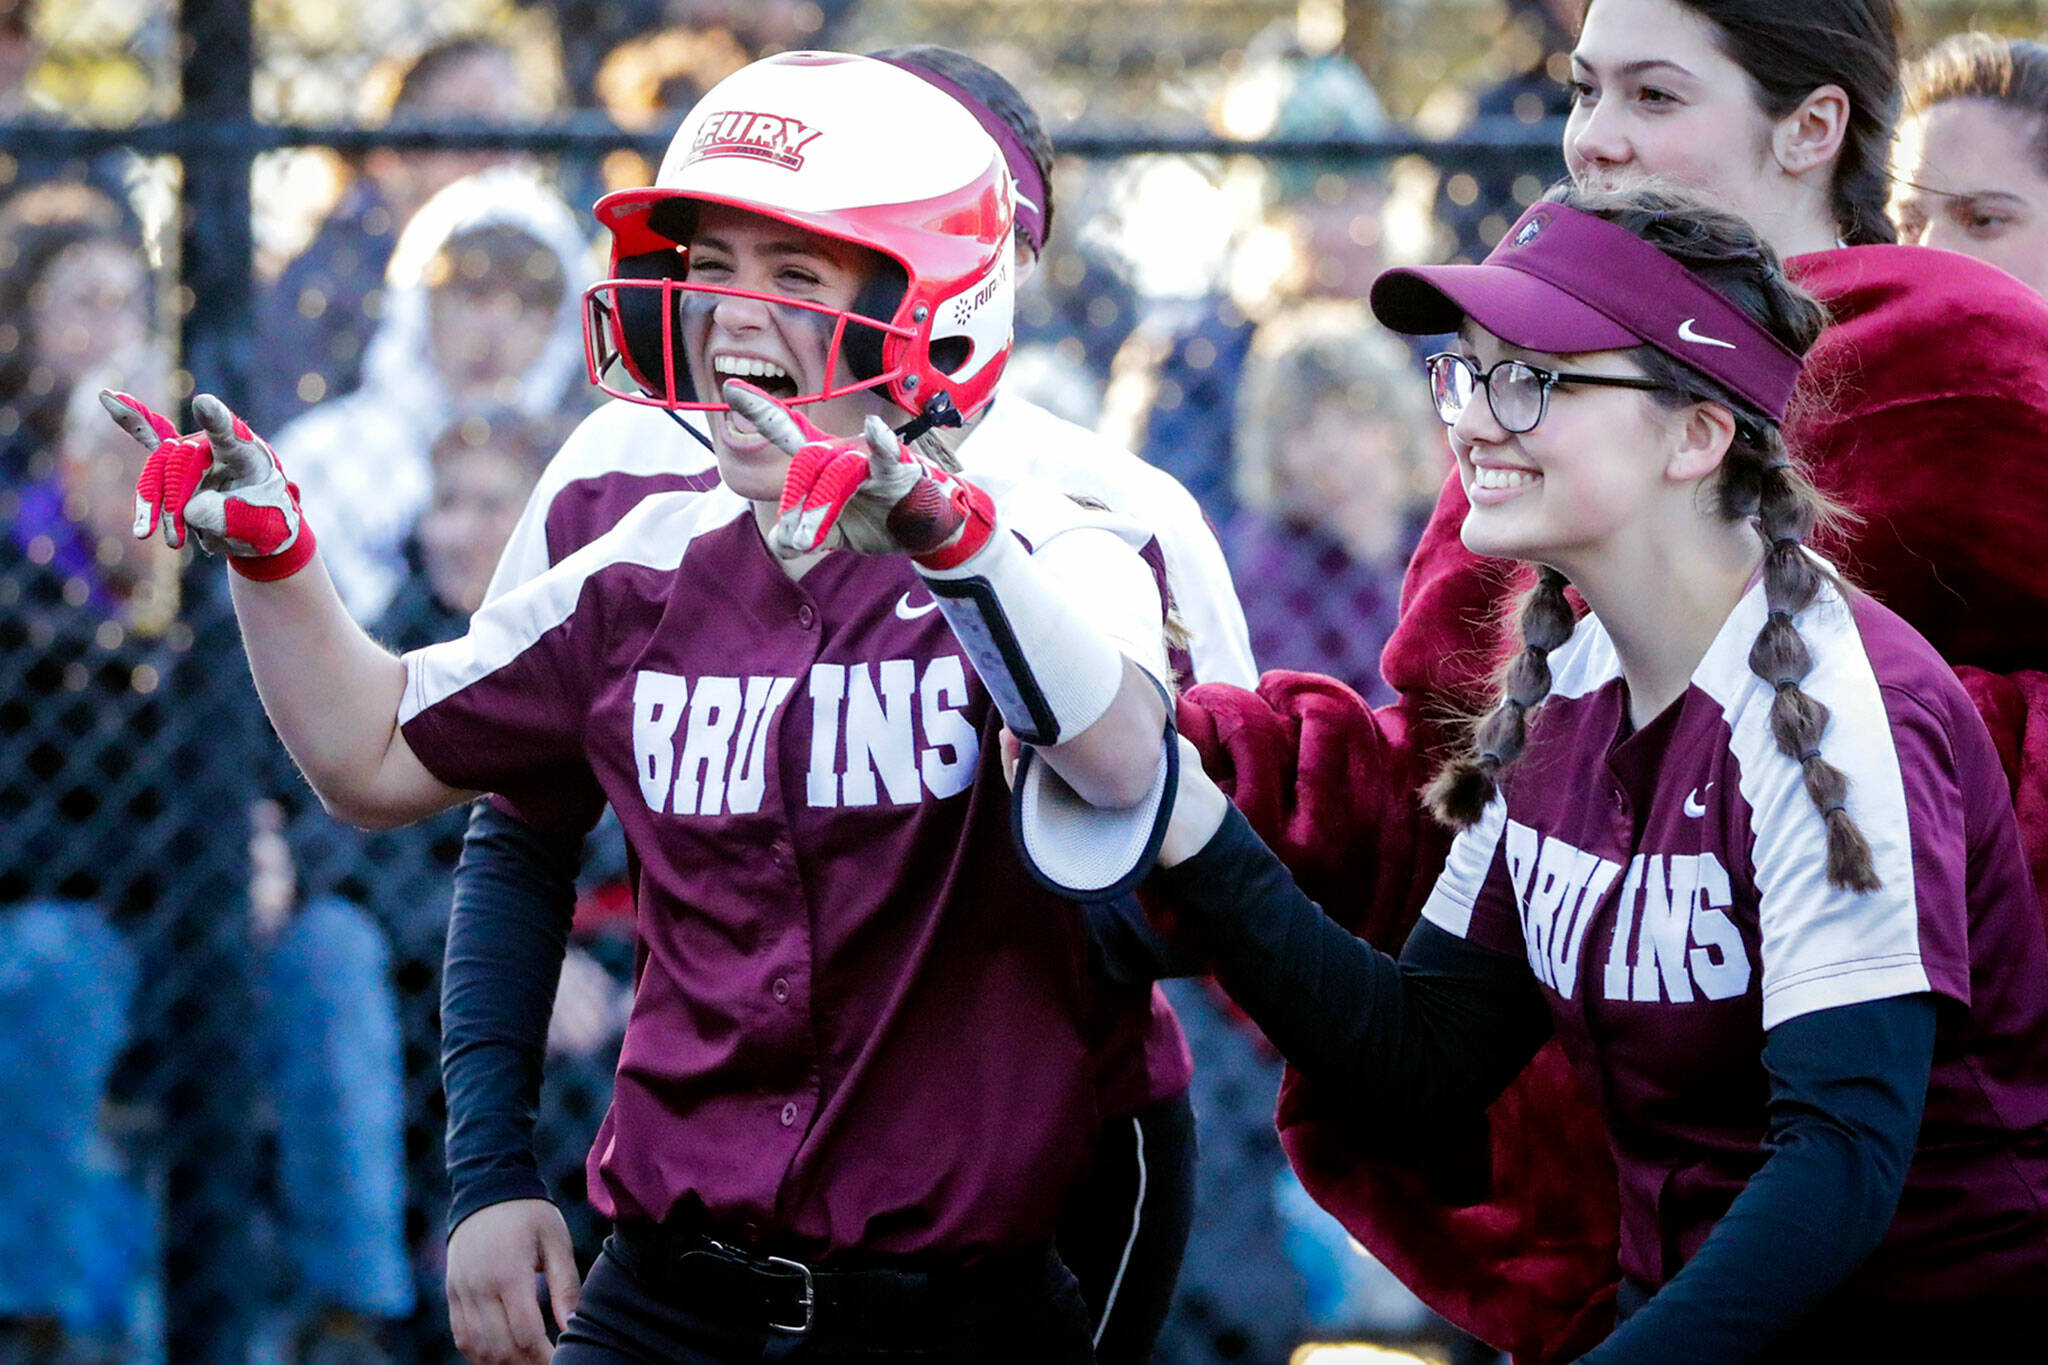 Cascade junior Ashlyee Bloch (left) celebrates her solo home run. The Bruins blasted seven homers in their title-game romp. (Kevin Clark / The Herald)